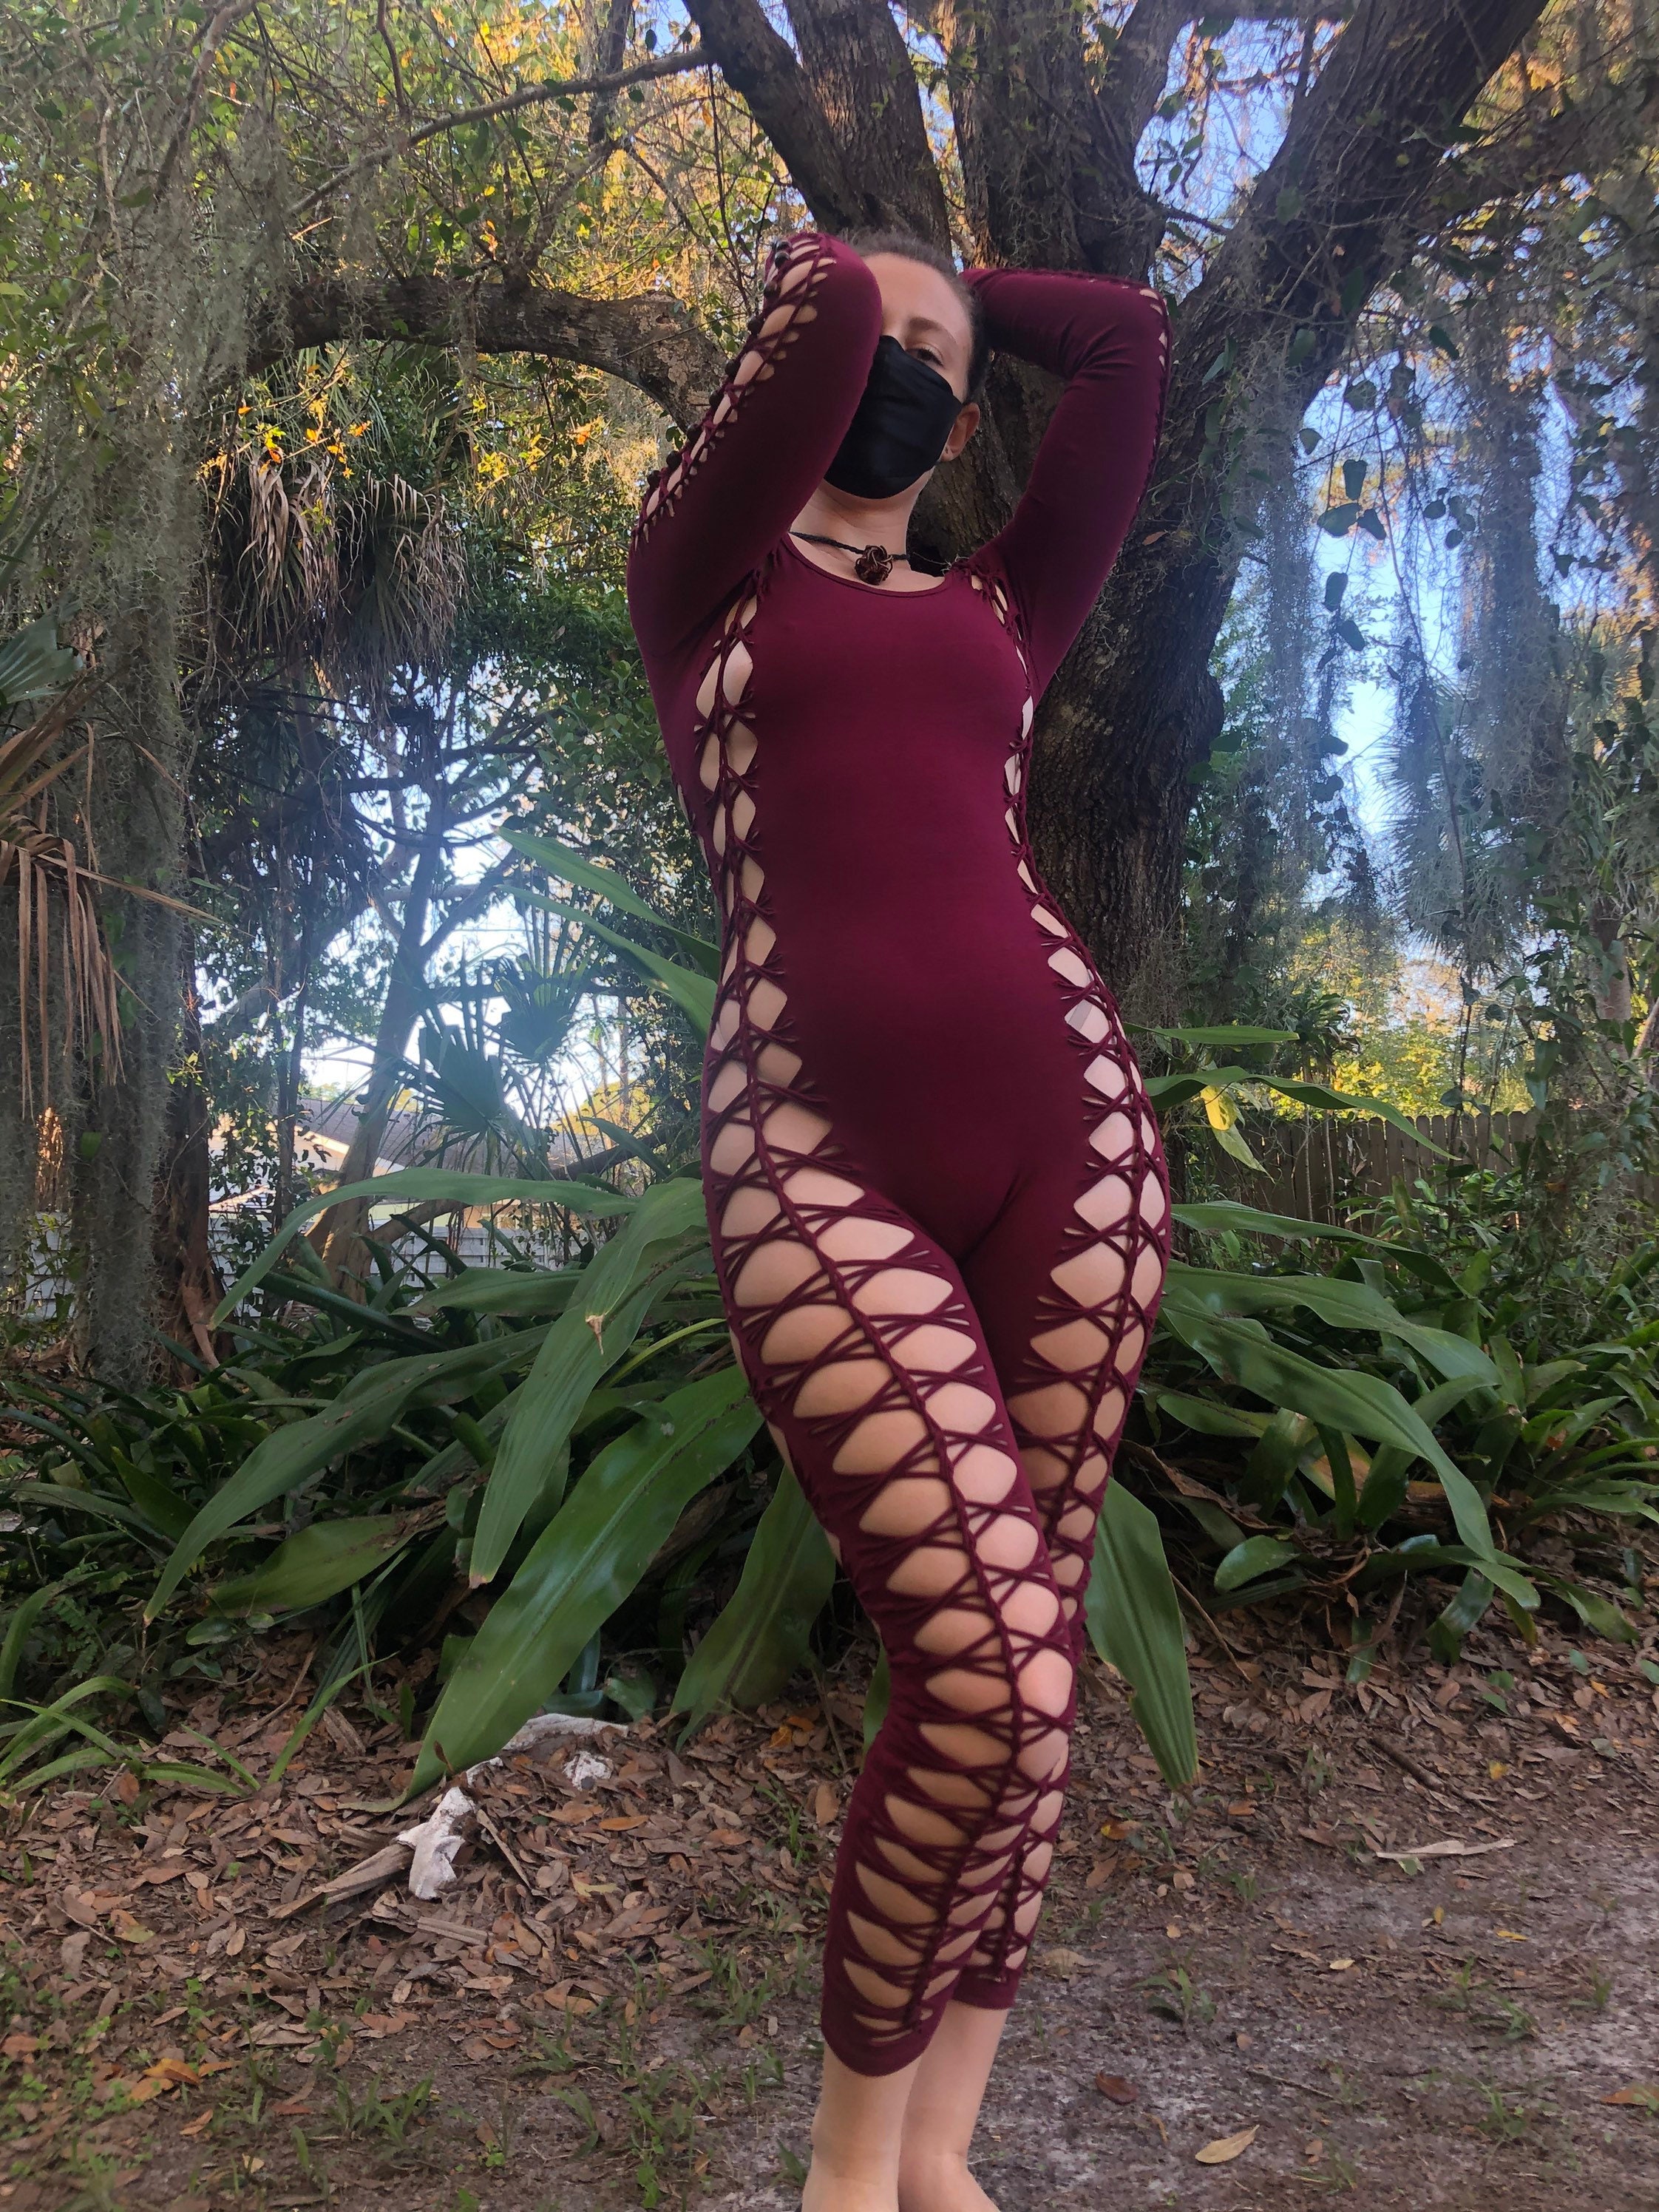 Ramblin Rose Flowsuit, Full Length Burgundy Maroon Rust Color Long Sleeve Fire Safe Hand Braided Catsuit, Slit Weave Festival Rave Outfit